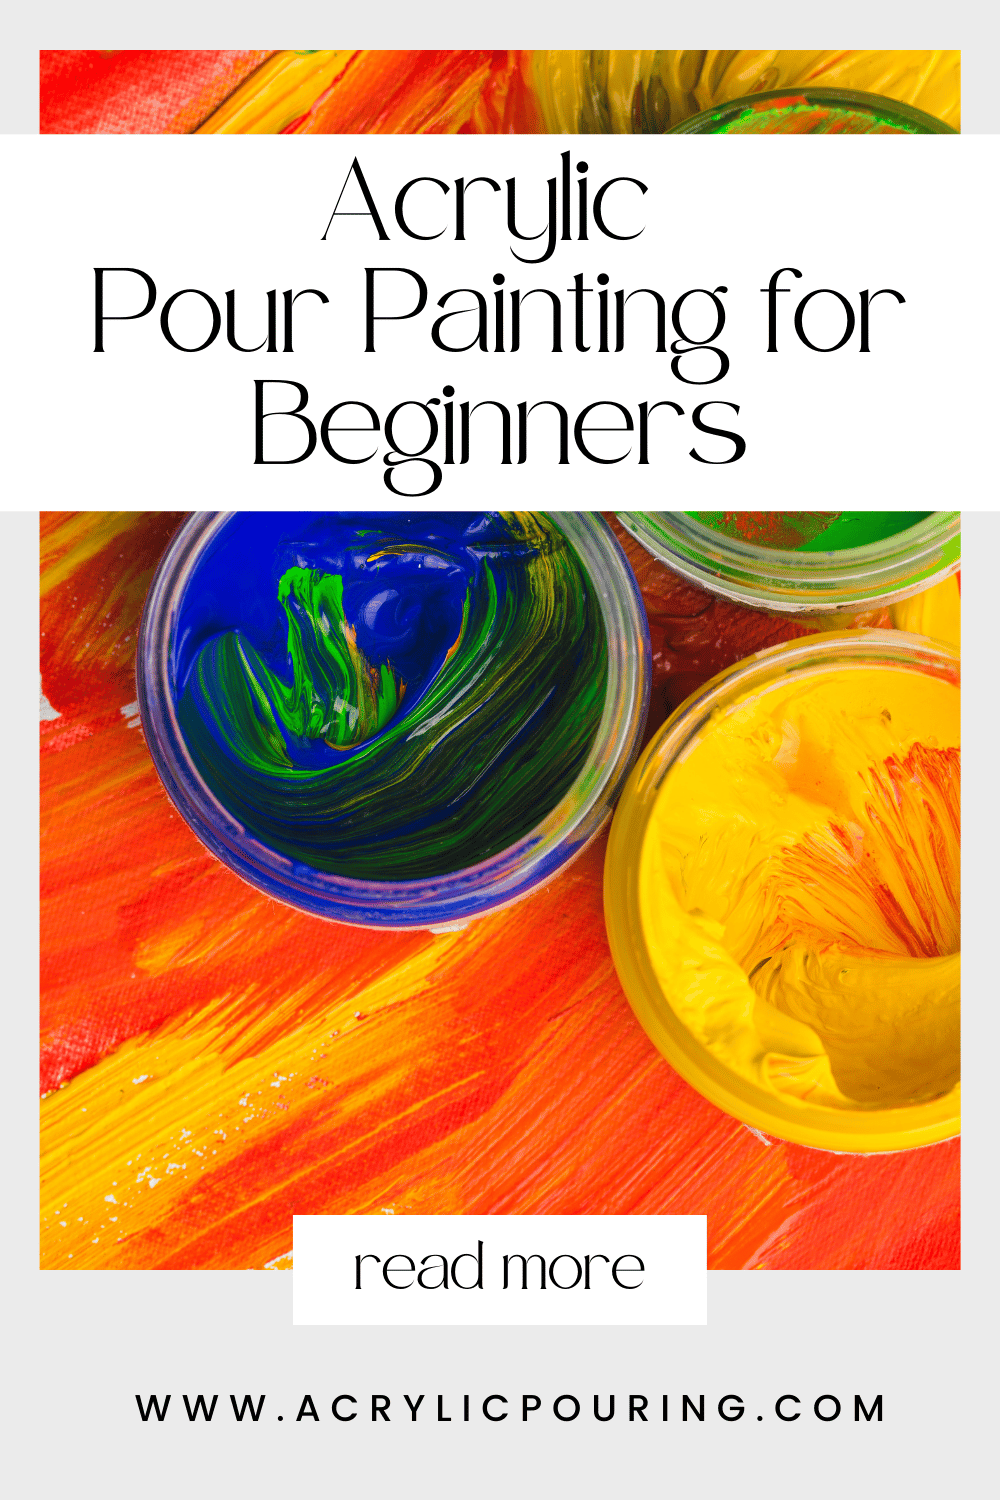 In this guide you will learn what paint pouring is, how it began, what supplies you need to start, and a step by step tutorial for your first pour. Let’s get started! #acrylicpainting #paintinglessons #acrylicpouring #artinspo #creativity